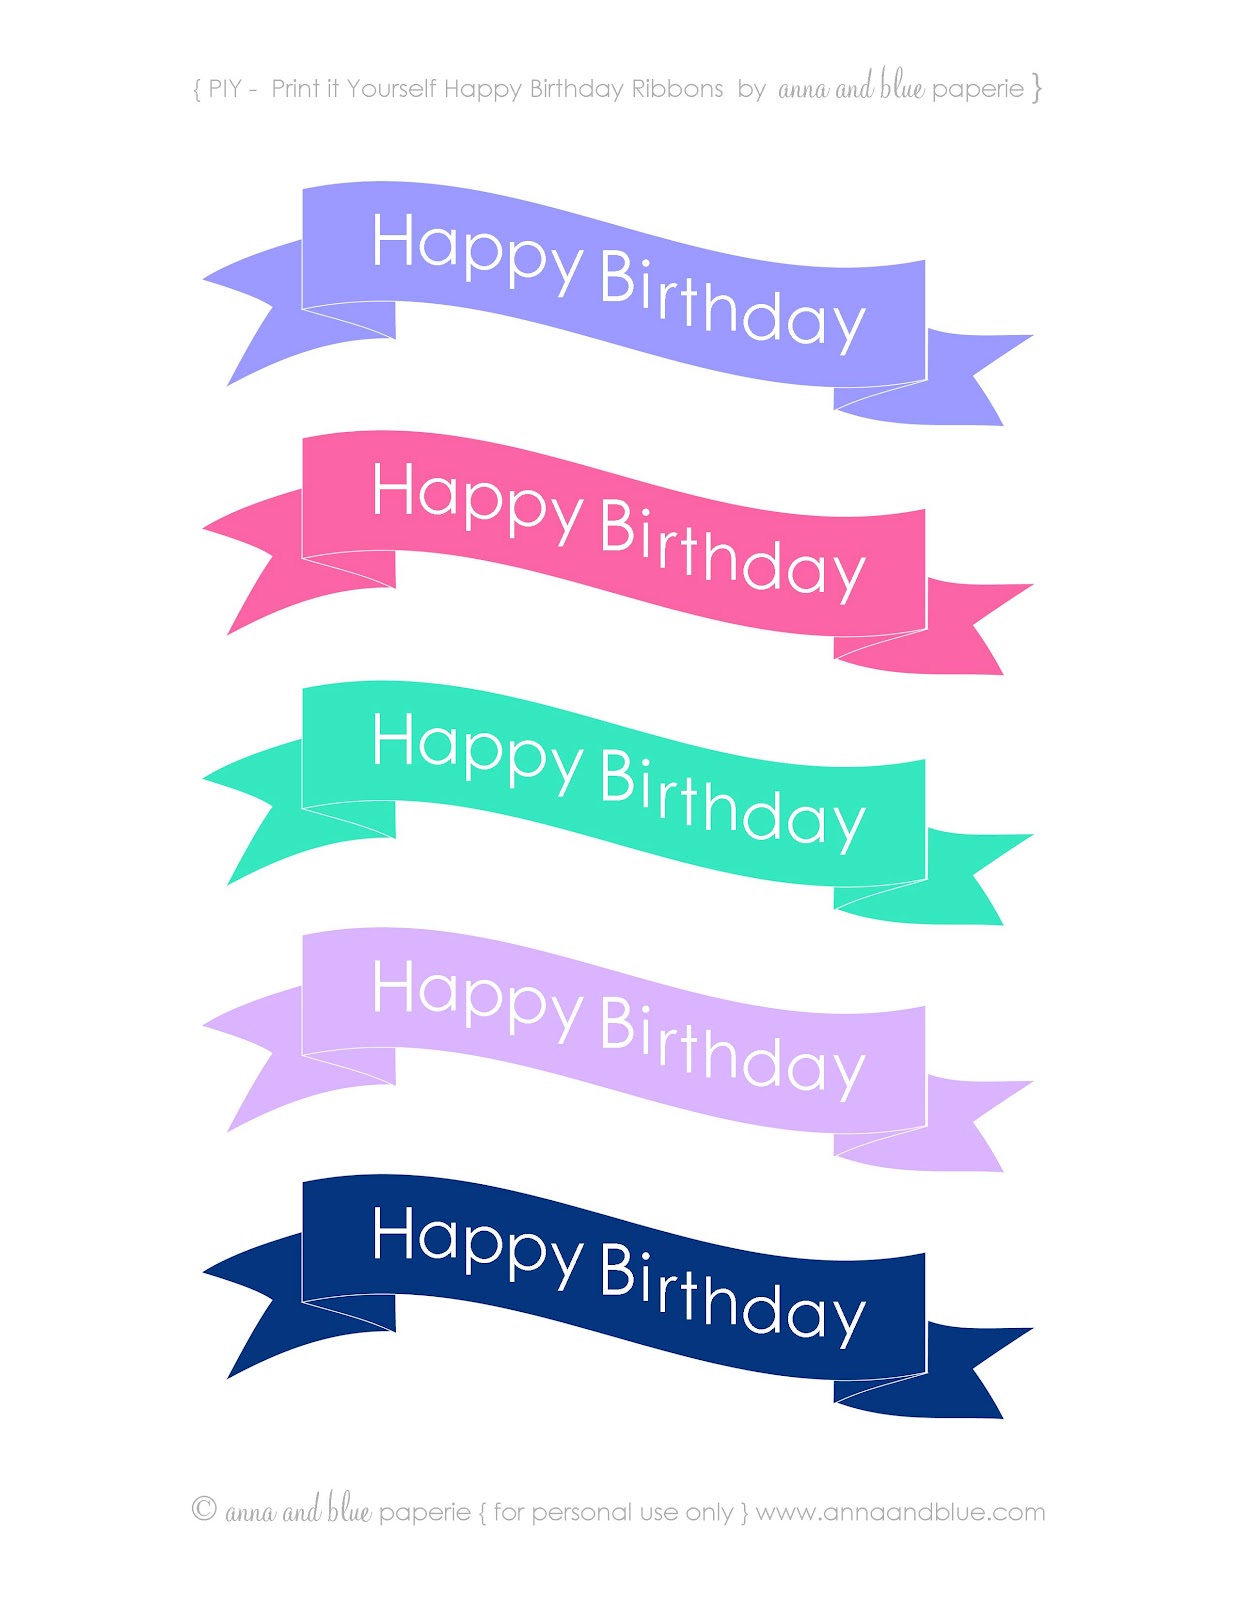 anna-and-blue-paperie-free-printable-happy-birthday-cake-banners